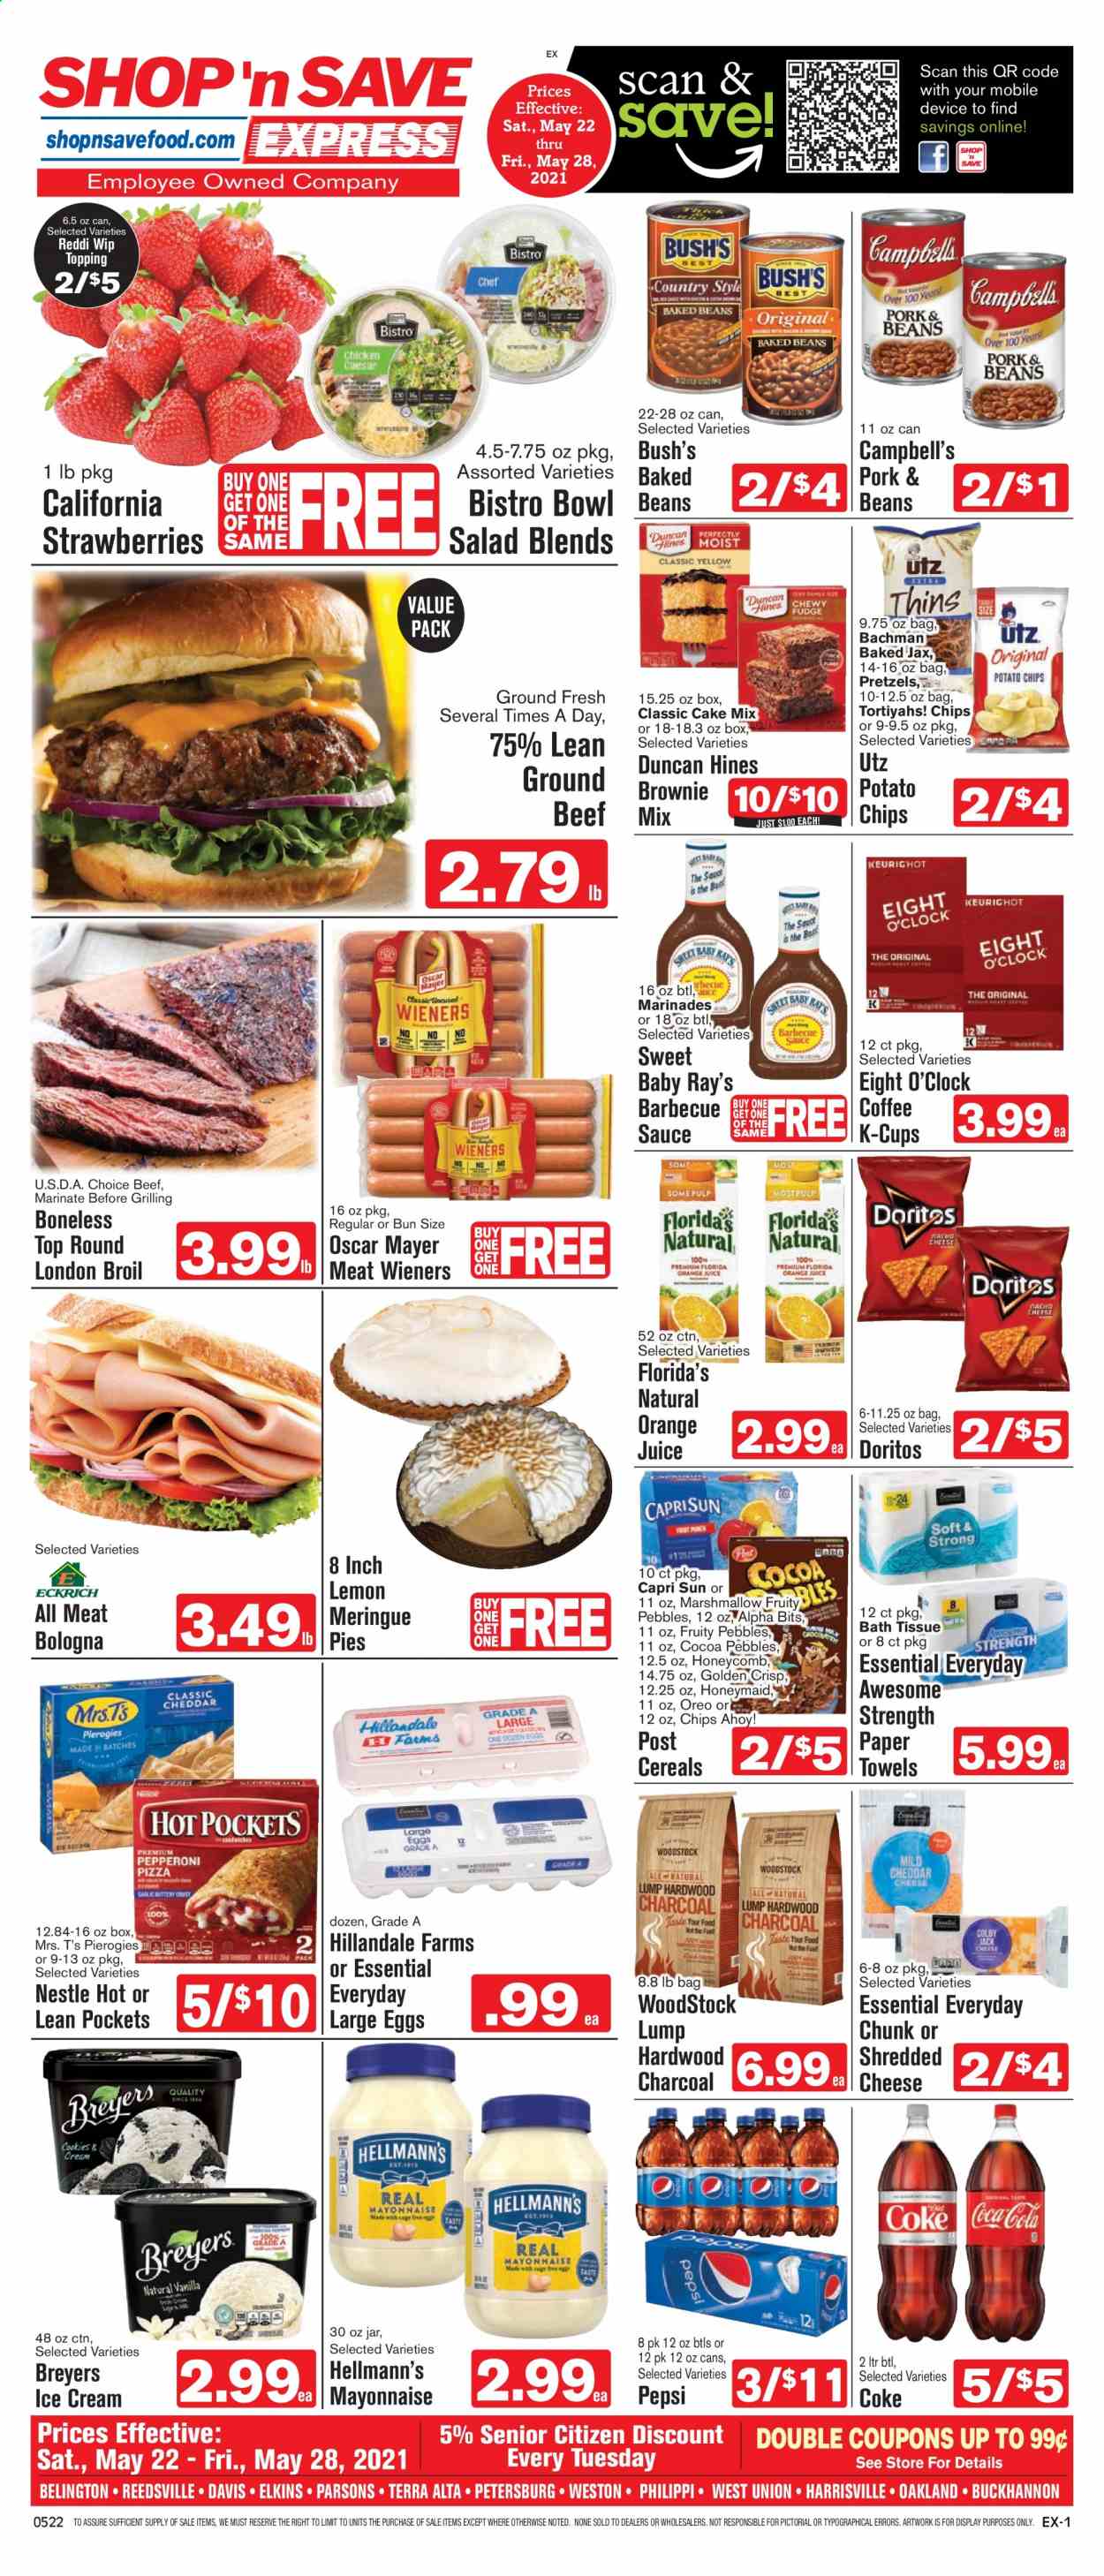 thumbnail - Shop ‘n Save Express Flyer - 05/22/2021 - 05/28/2021 - Sales products - pretzels, brownies, cake mix, salad, strawberries, beef meat, ground beef, Campbell's, sauce, Oscar Mayer, shredded cheese, cheese, large eggs, mayonnaise, Hellmann’s, ice cream, marshmallows, Nestlé, Chips Ahoy!, Florida's Natural, Doritos, potato chips, chips, topping, baked beans, cereals, Fruity Pebbles, Capri Sun, Pepsi, orange juice, juice, coffee, coffee capsules, K-Cups, Eight O'Clock, bath tissue, kitchen towels, paper towels. Page 1.